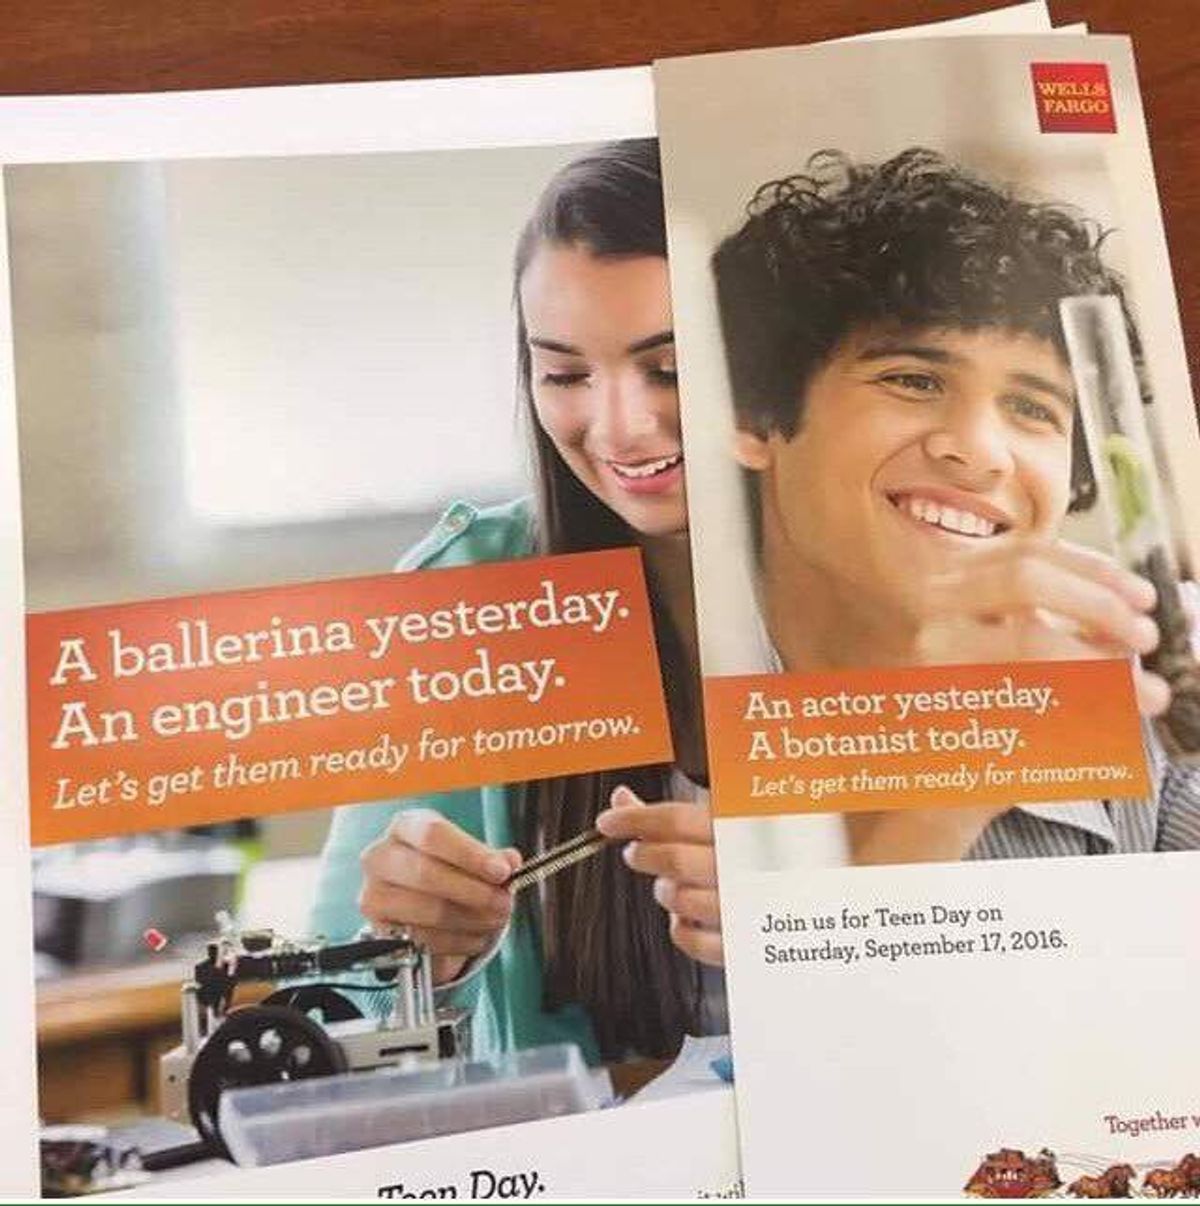 Why I'm Not A Fan Of The Wells Fargo Ad